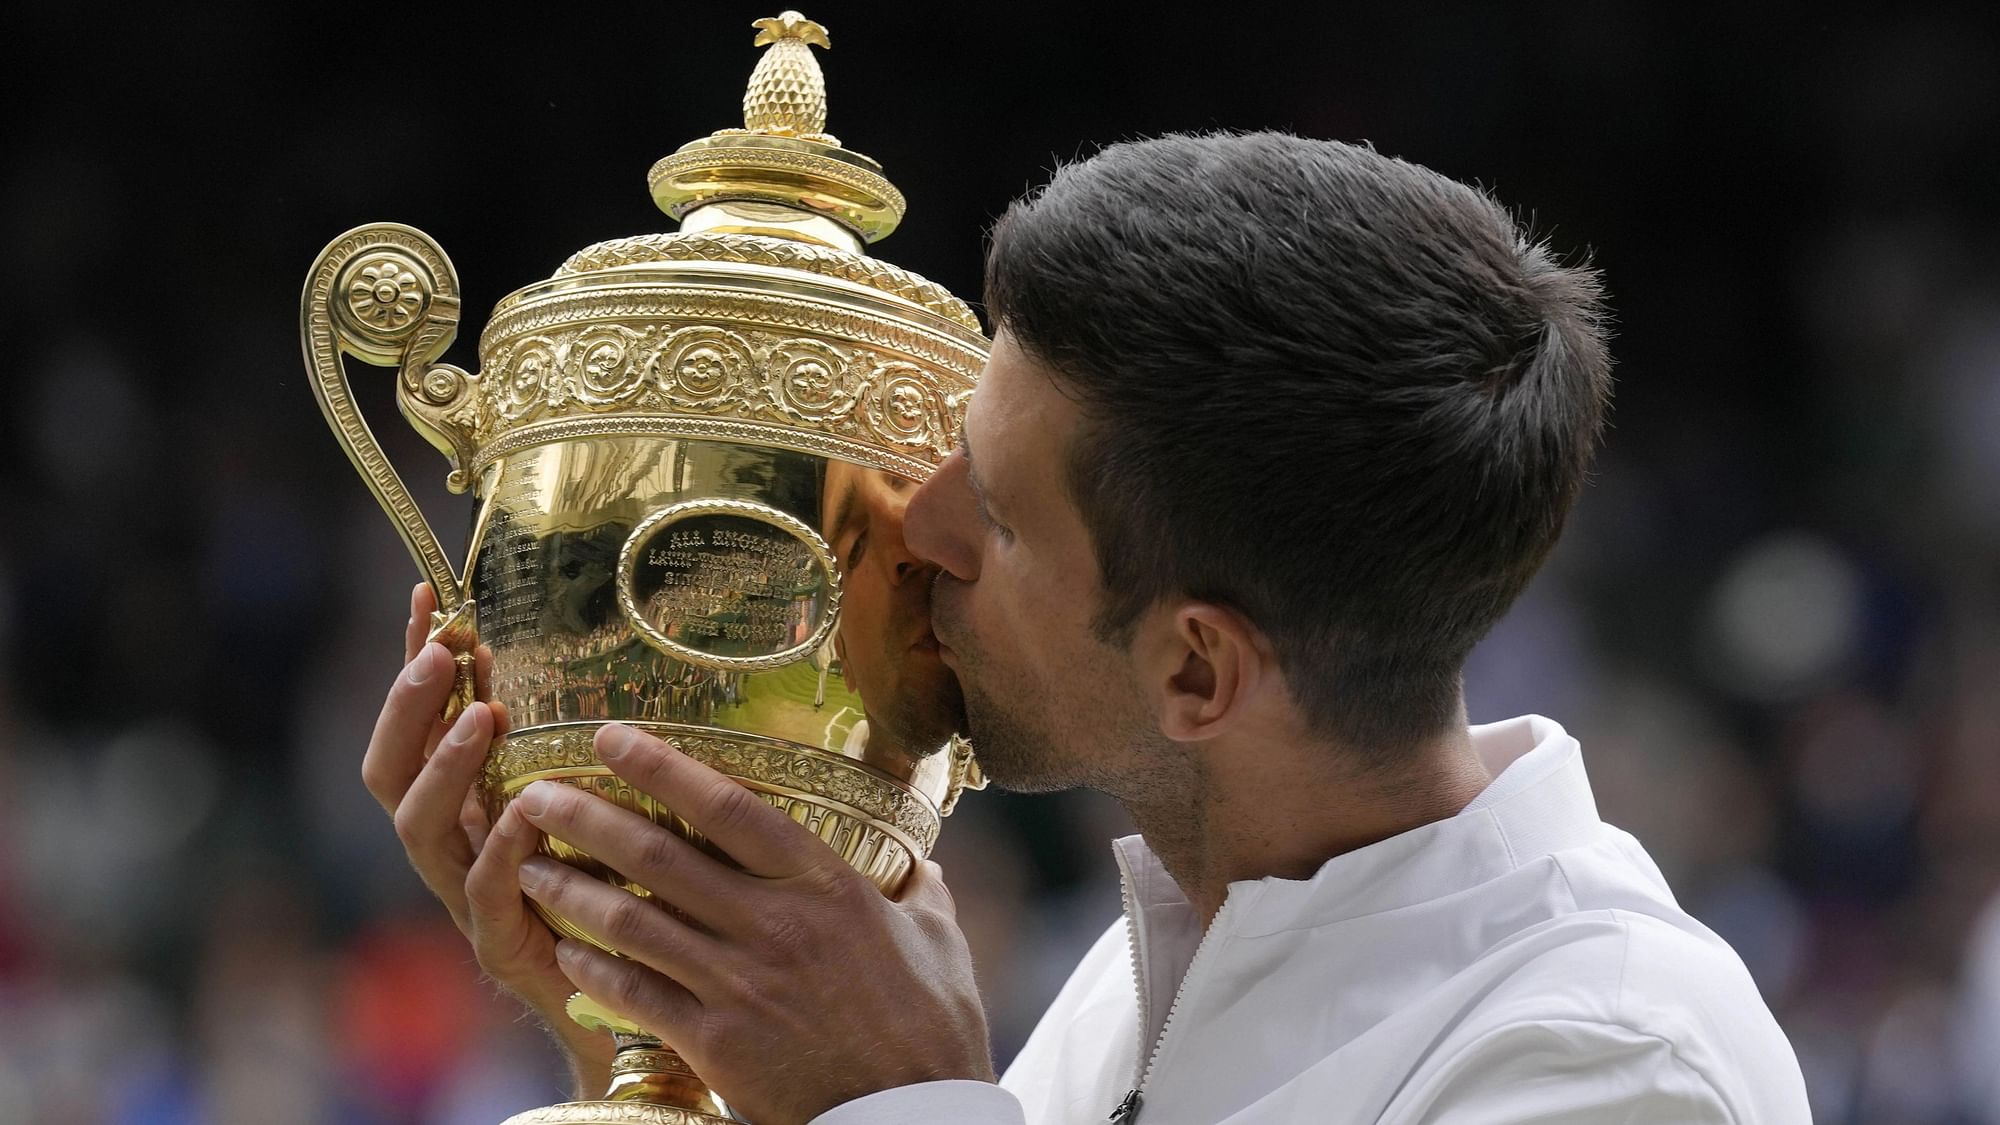 <div class="paragraphs"><p>Serbia's Novak Djokovic kisses the winners trophy as he poses for photographers after he defeated Italy's Matteo Berrettini in the men's singles final on day thirteen of the Wimbledon Tennis Championships in London, Sunday, July 11, 2021.</p></div>